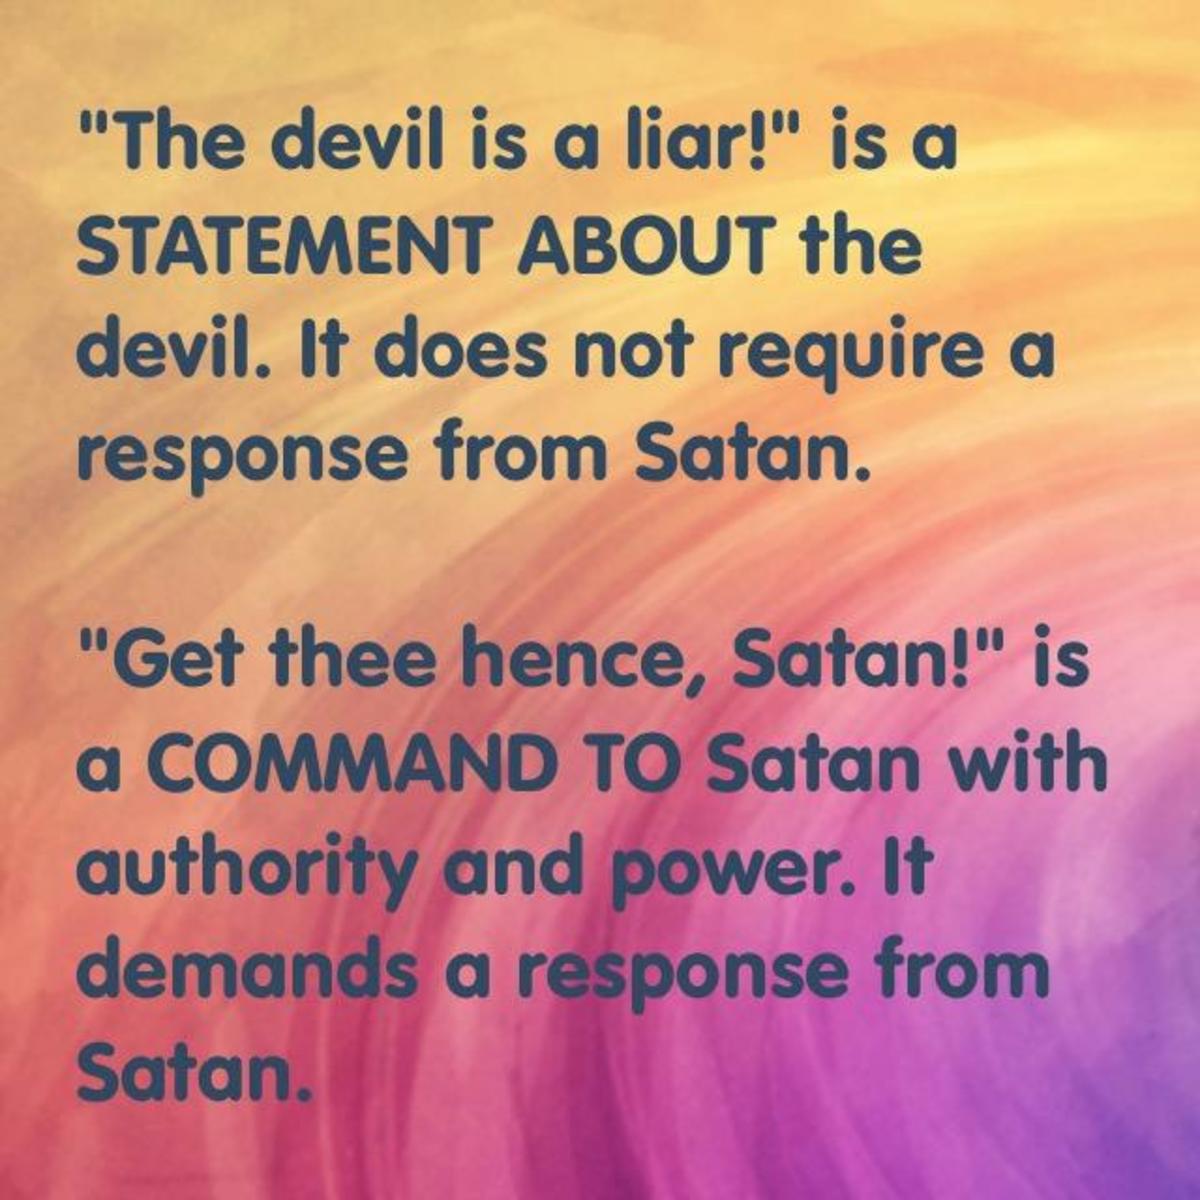 'The Devil Is a Liar' vs. 'Get Thee Hence, Satan!'